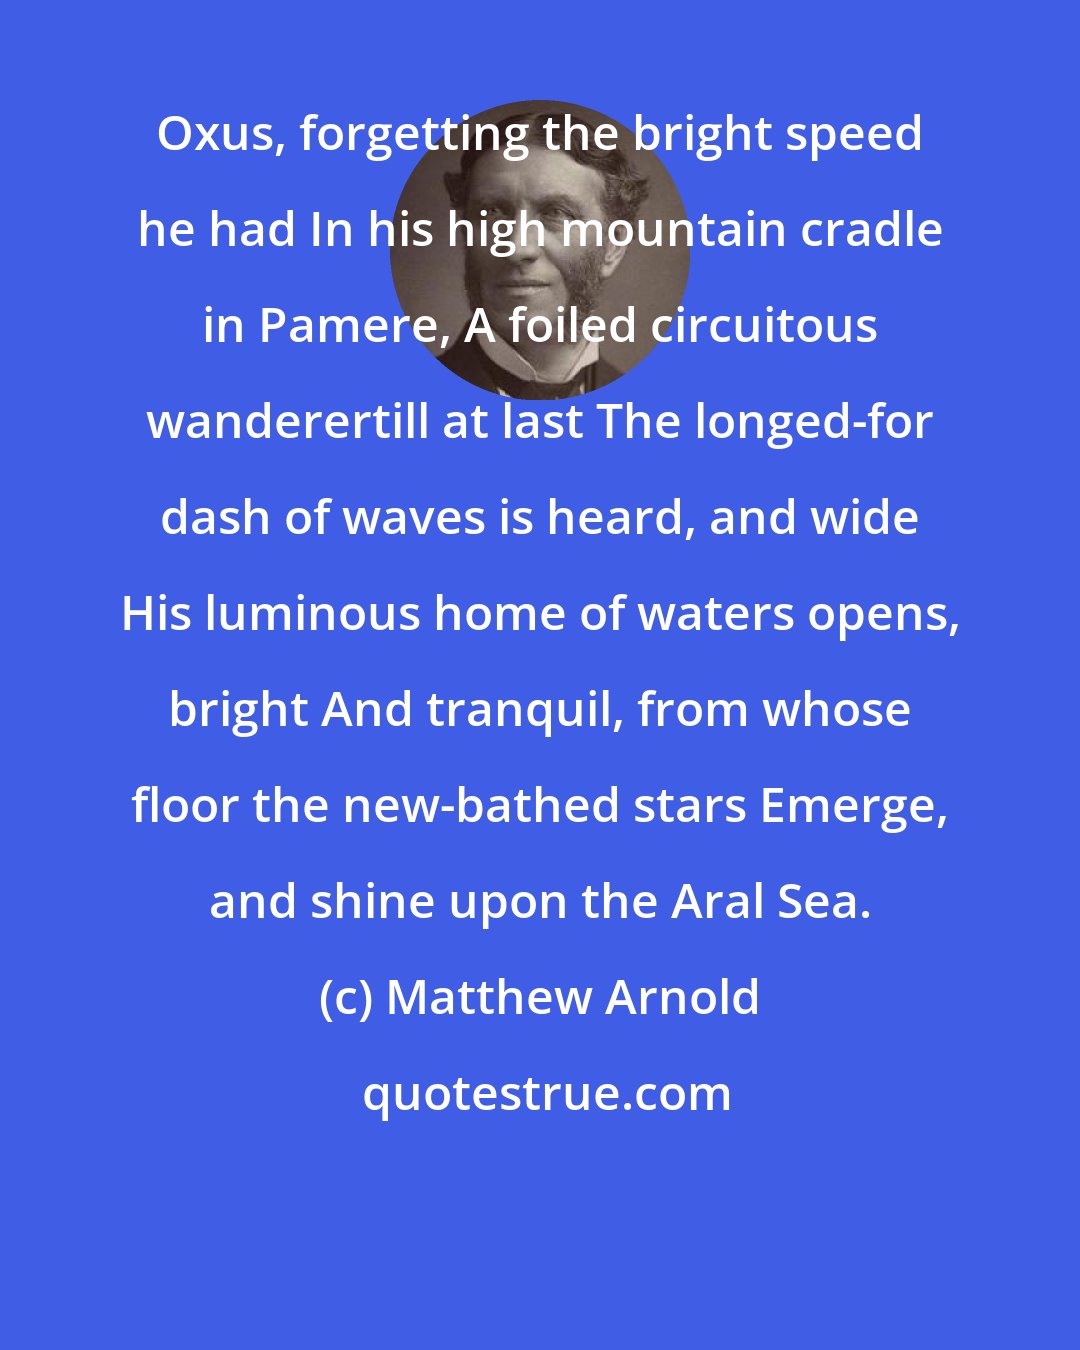 Matthew Arnold: Oxus, forgetting the bright speed he had In his high mountain cradle in Pamere, A foiled circuitous wanderertill at last The longed-for dash of waves is heard, and wide His luminous home of waters opens, bright And tranquil, from whose floor the new-bathed stars Emerge, and shine upon the Aral Sea.